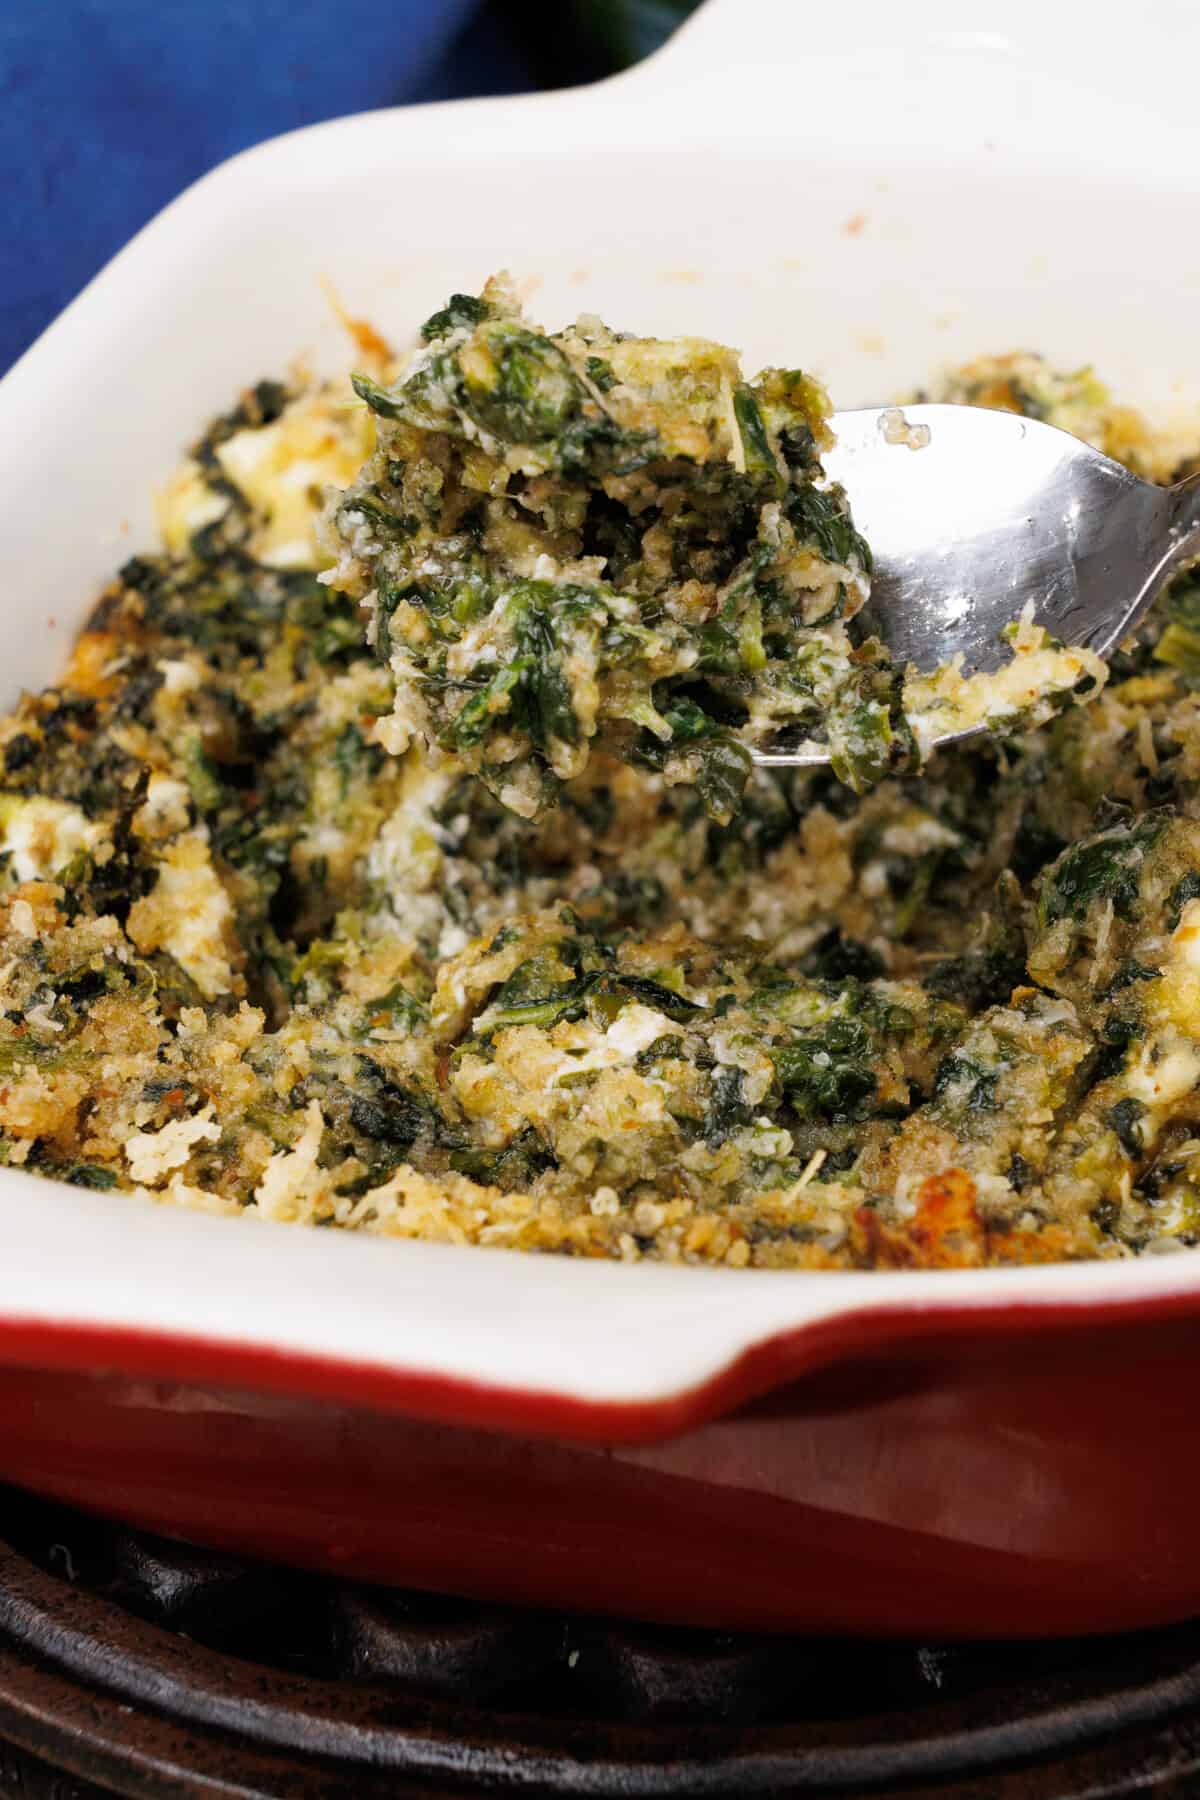 a small batch of creamy baked spinach in a red dish